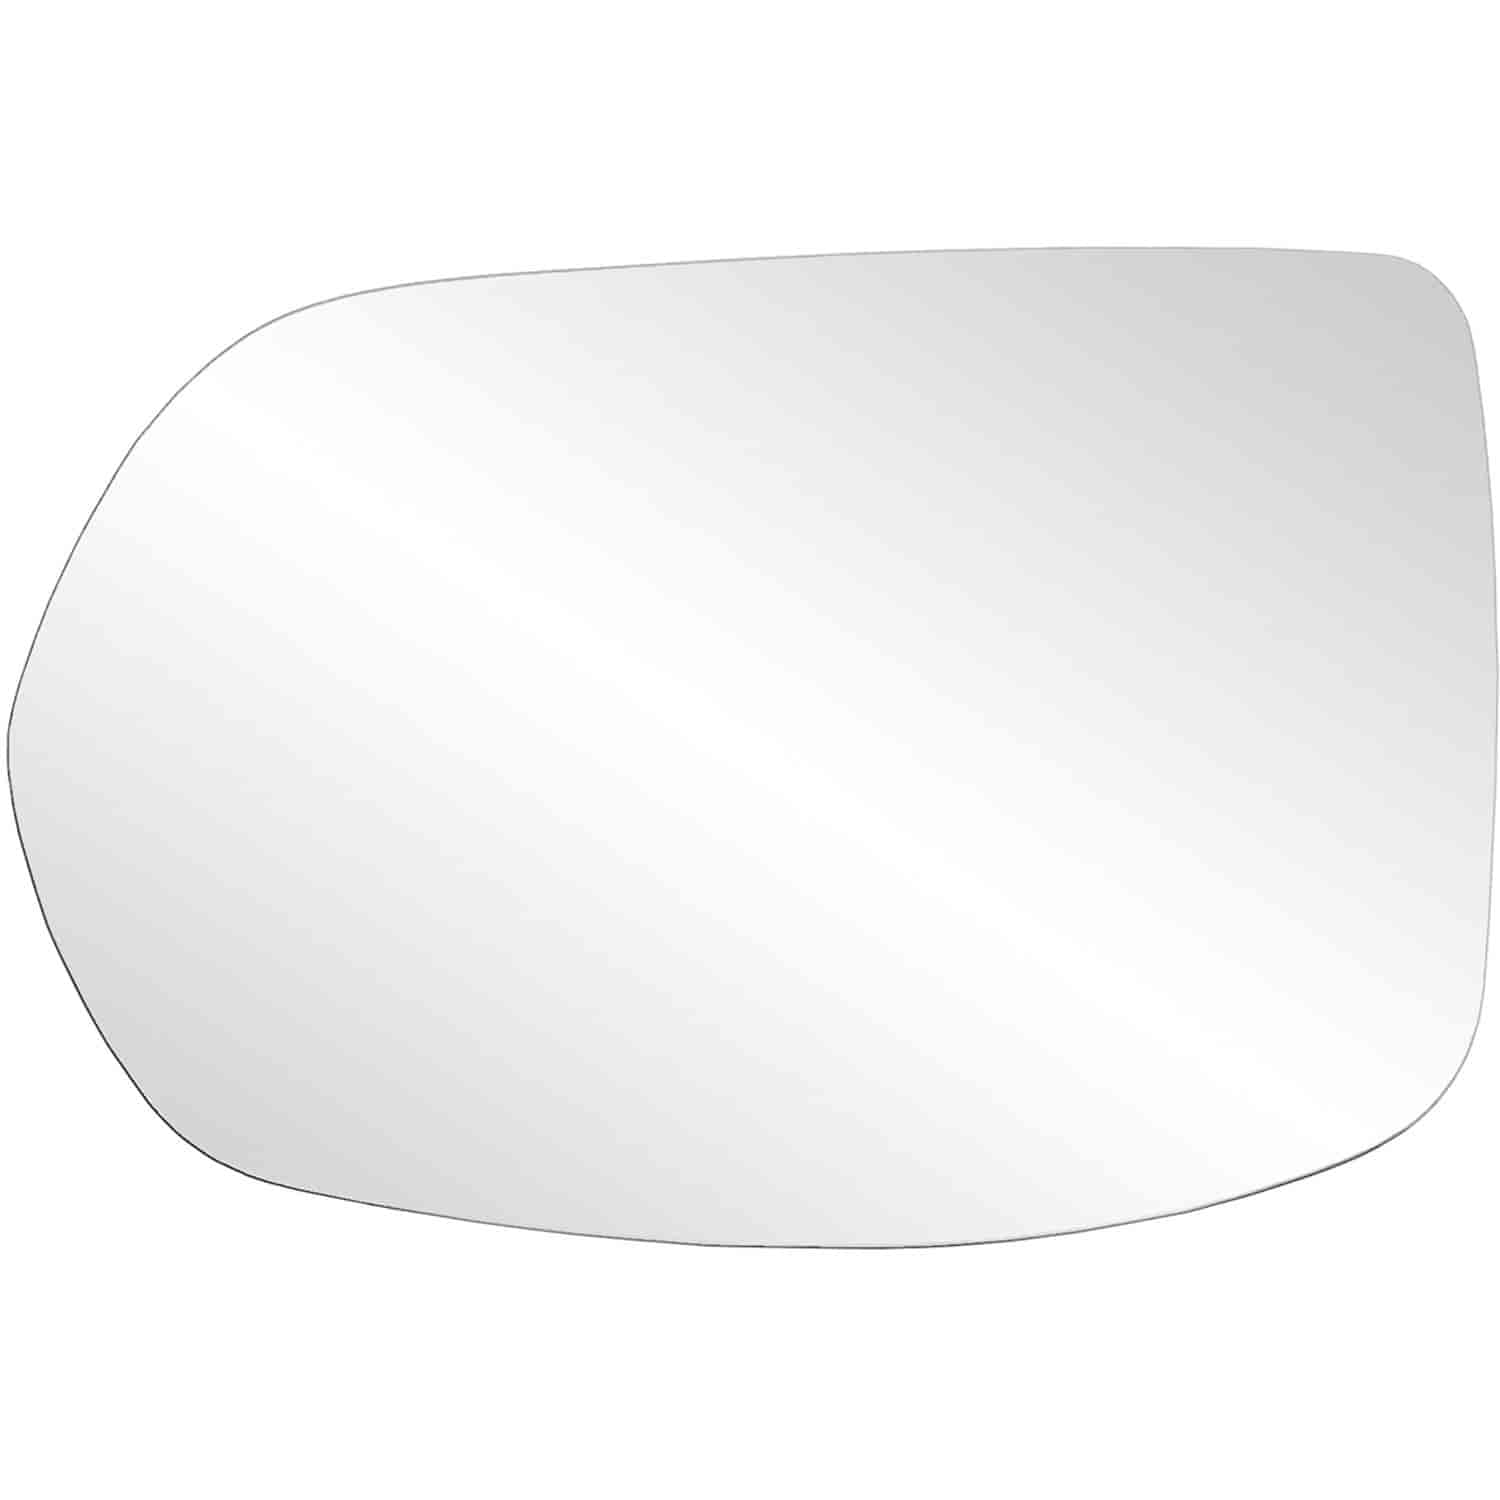 Heated Replacement Glass Assembly for 12-14 CR-V replace your cracked or broken driver side mirror g